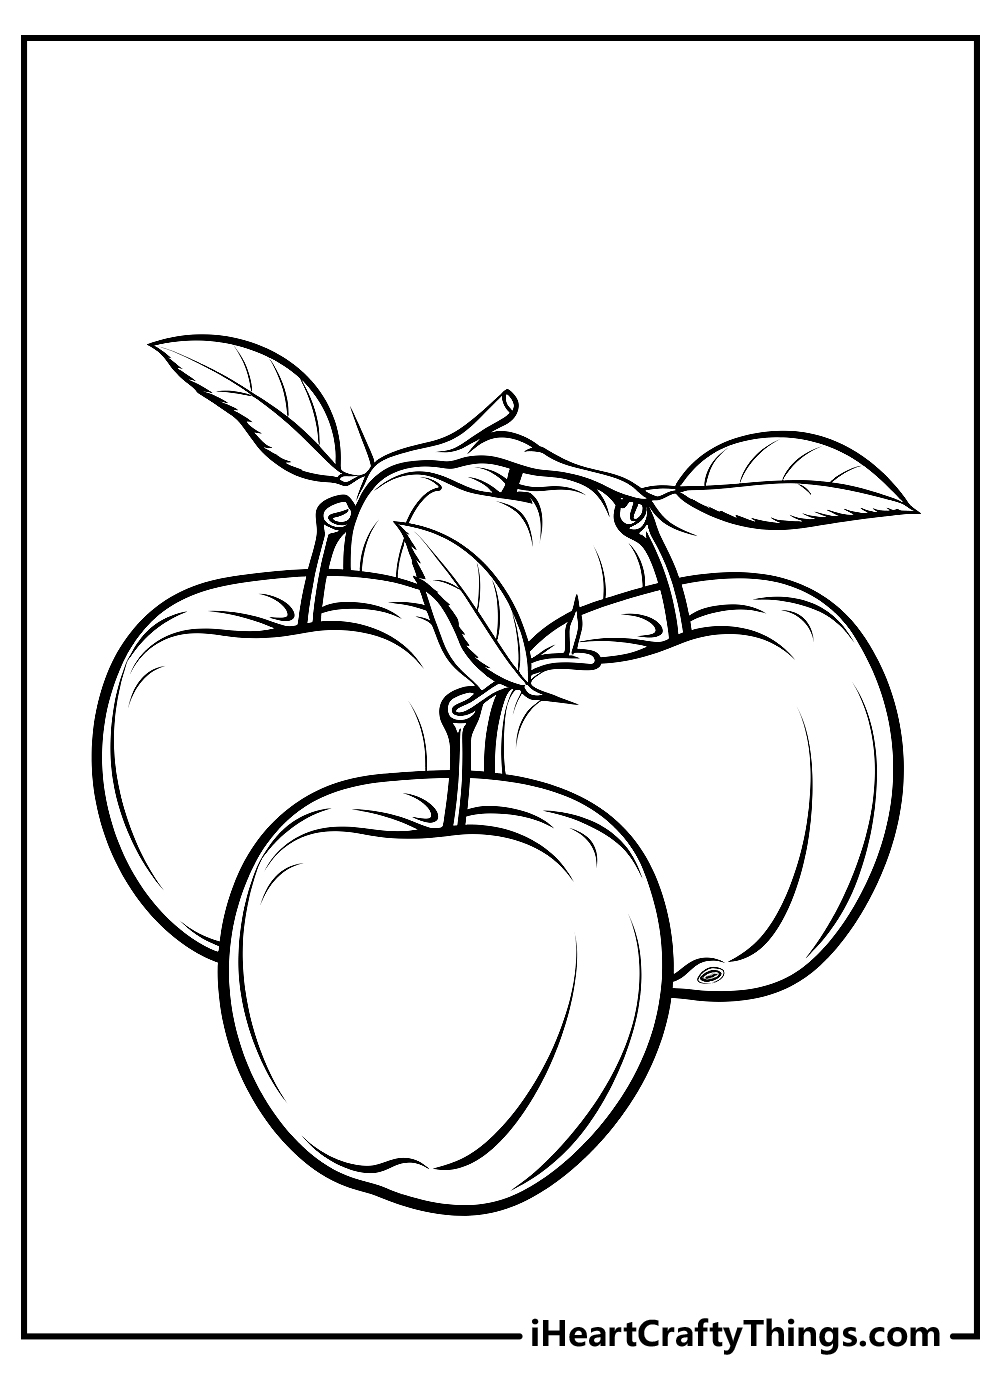 free original apple coloring pages